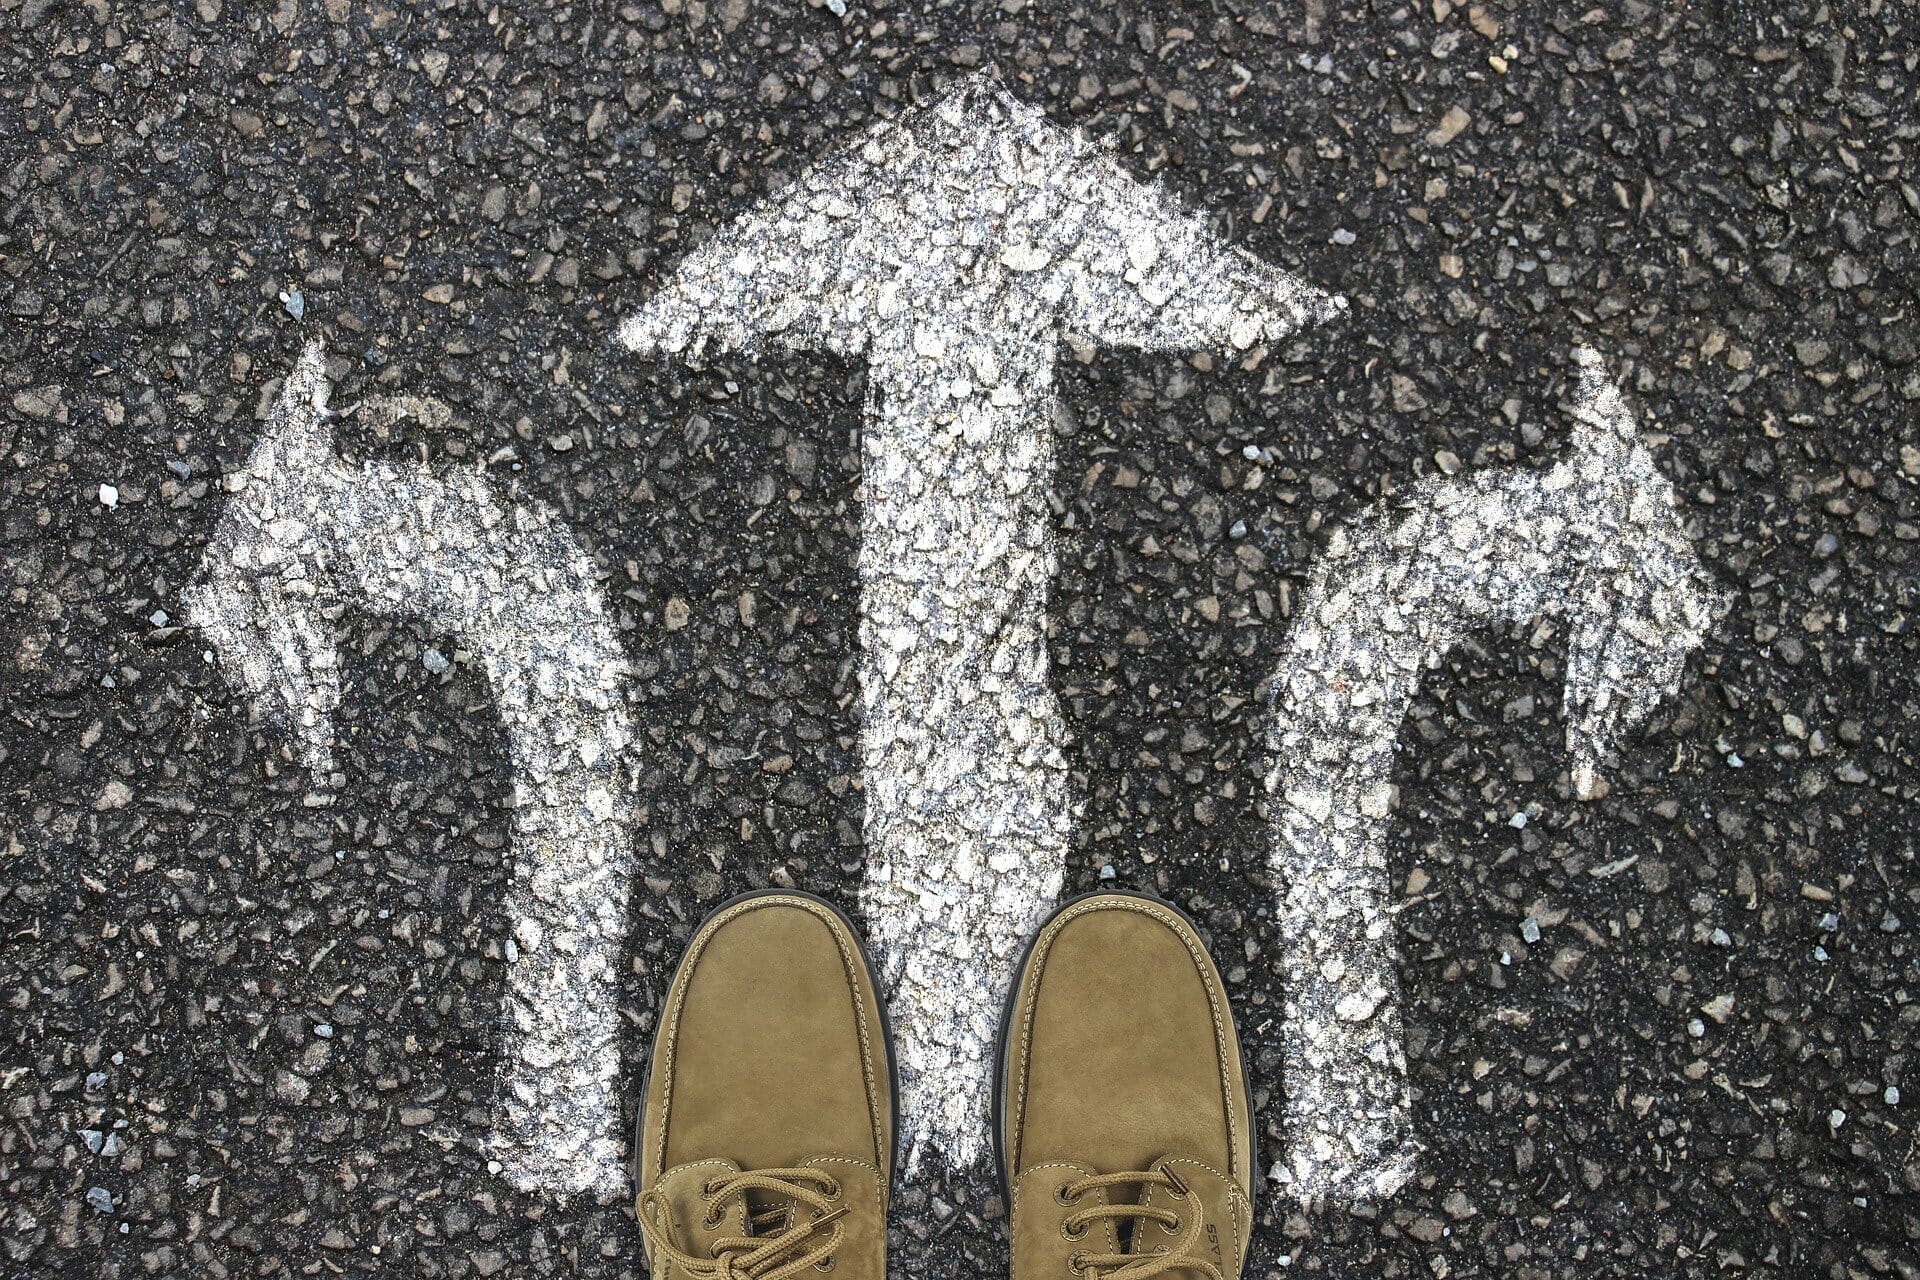 Tarmac surface man's shoes. Three painted arrows point, left, right and straight ahead.